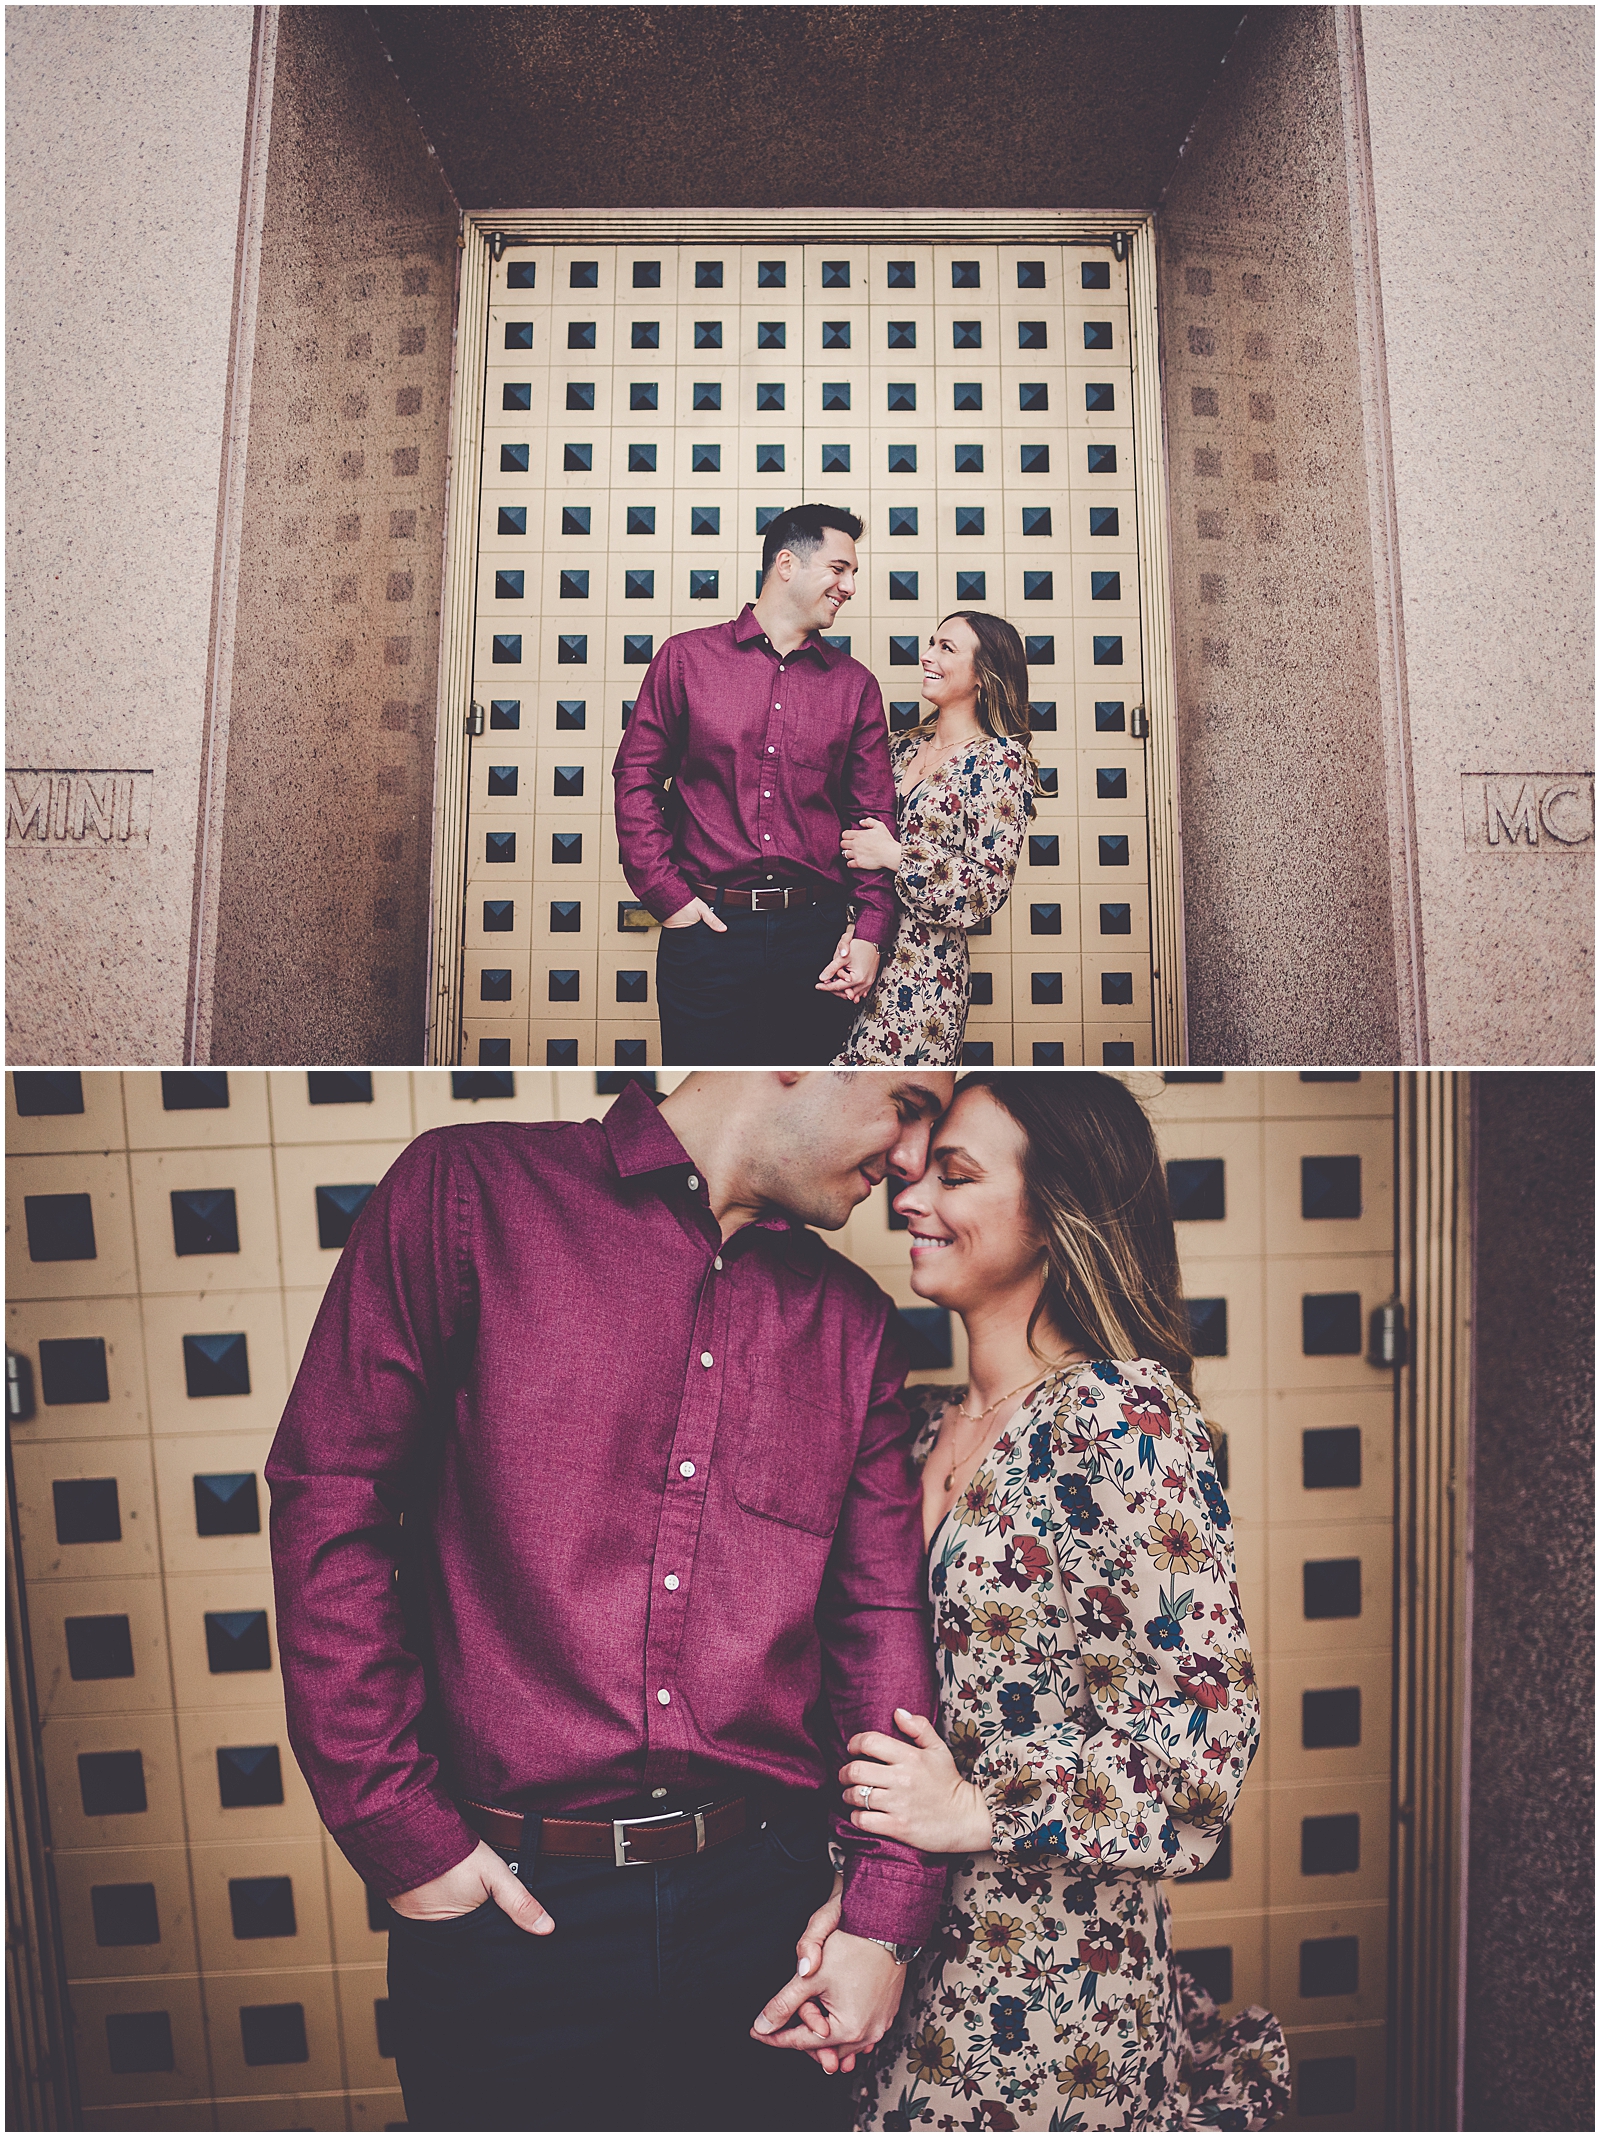 Emily and Milan's October Loyola University engagement photos in Chicago, IL with Chicagoland wedding photographer Kara Evans Photographer.